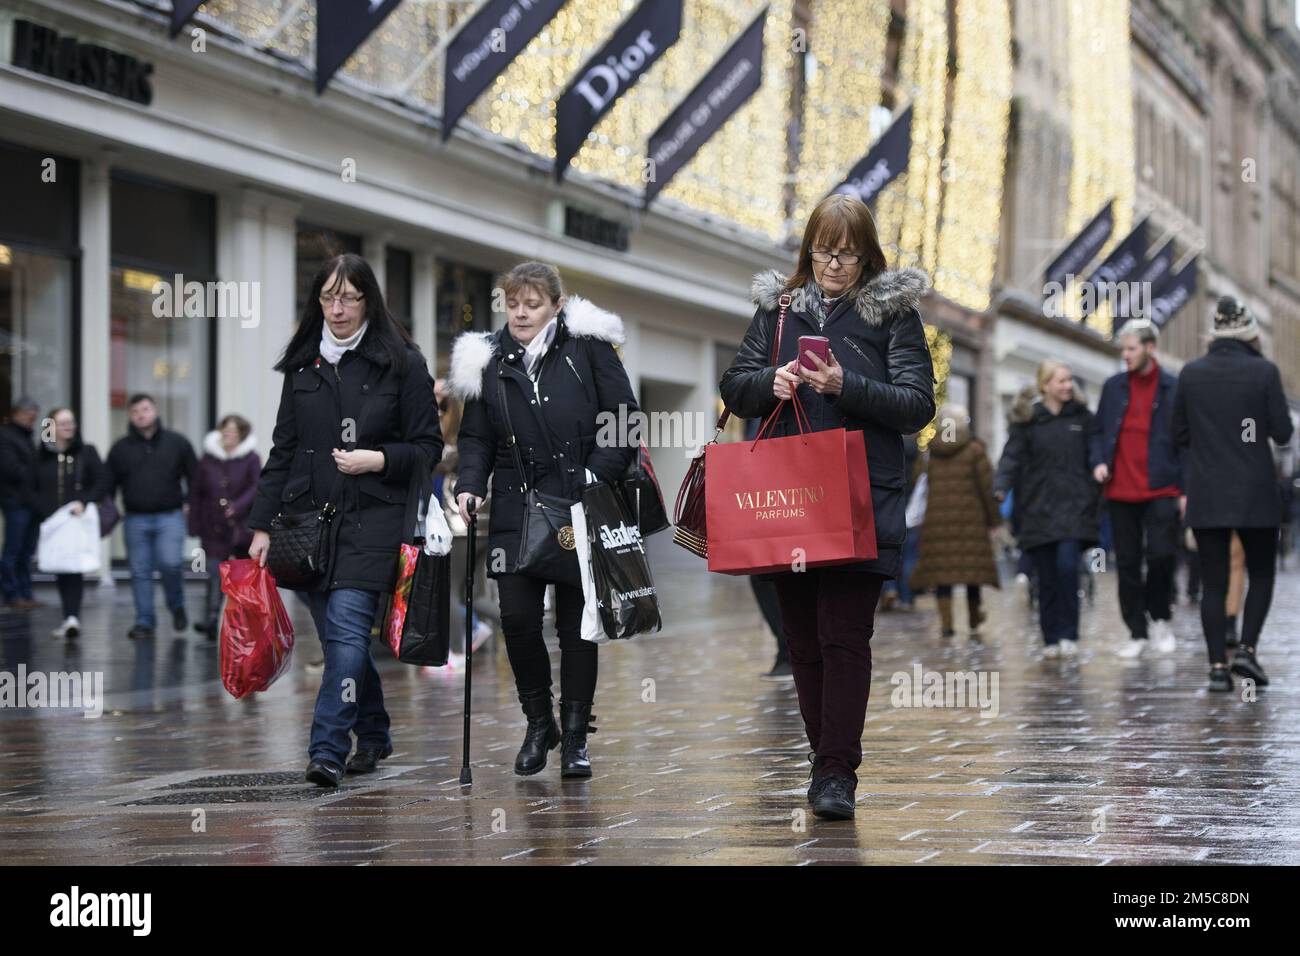 File photo dated 17/12/17 of shoppers on Buchanan Street in Glasgow city centre. Scotland's retail sector can thrive in the year ahead, a leading industry figure insisted, as he raised concerns about the impact of tax rises north of the border and the new deposit return scheme for drinks cans and bottles. David Lonsdale, director of the Scottish Retail Consortium (SRC), said decisions in the Scottish budget to freeze income tax thresholds and to increase charges for higher earners were 'likely to take a bite out of consumer spending at a time when retail sales are set to remain sluggish'. Issu Stock Photo